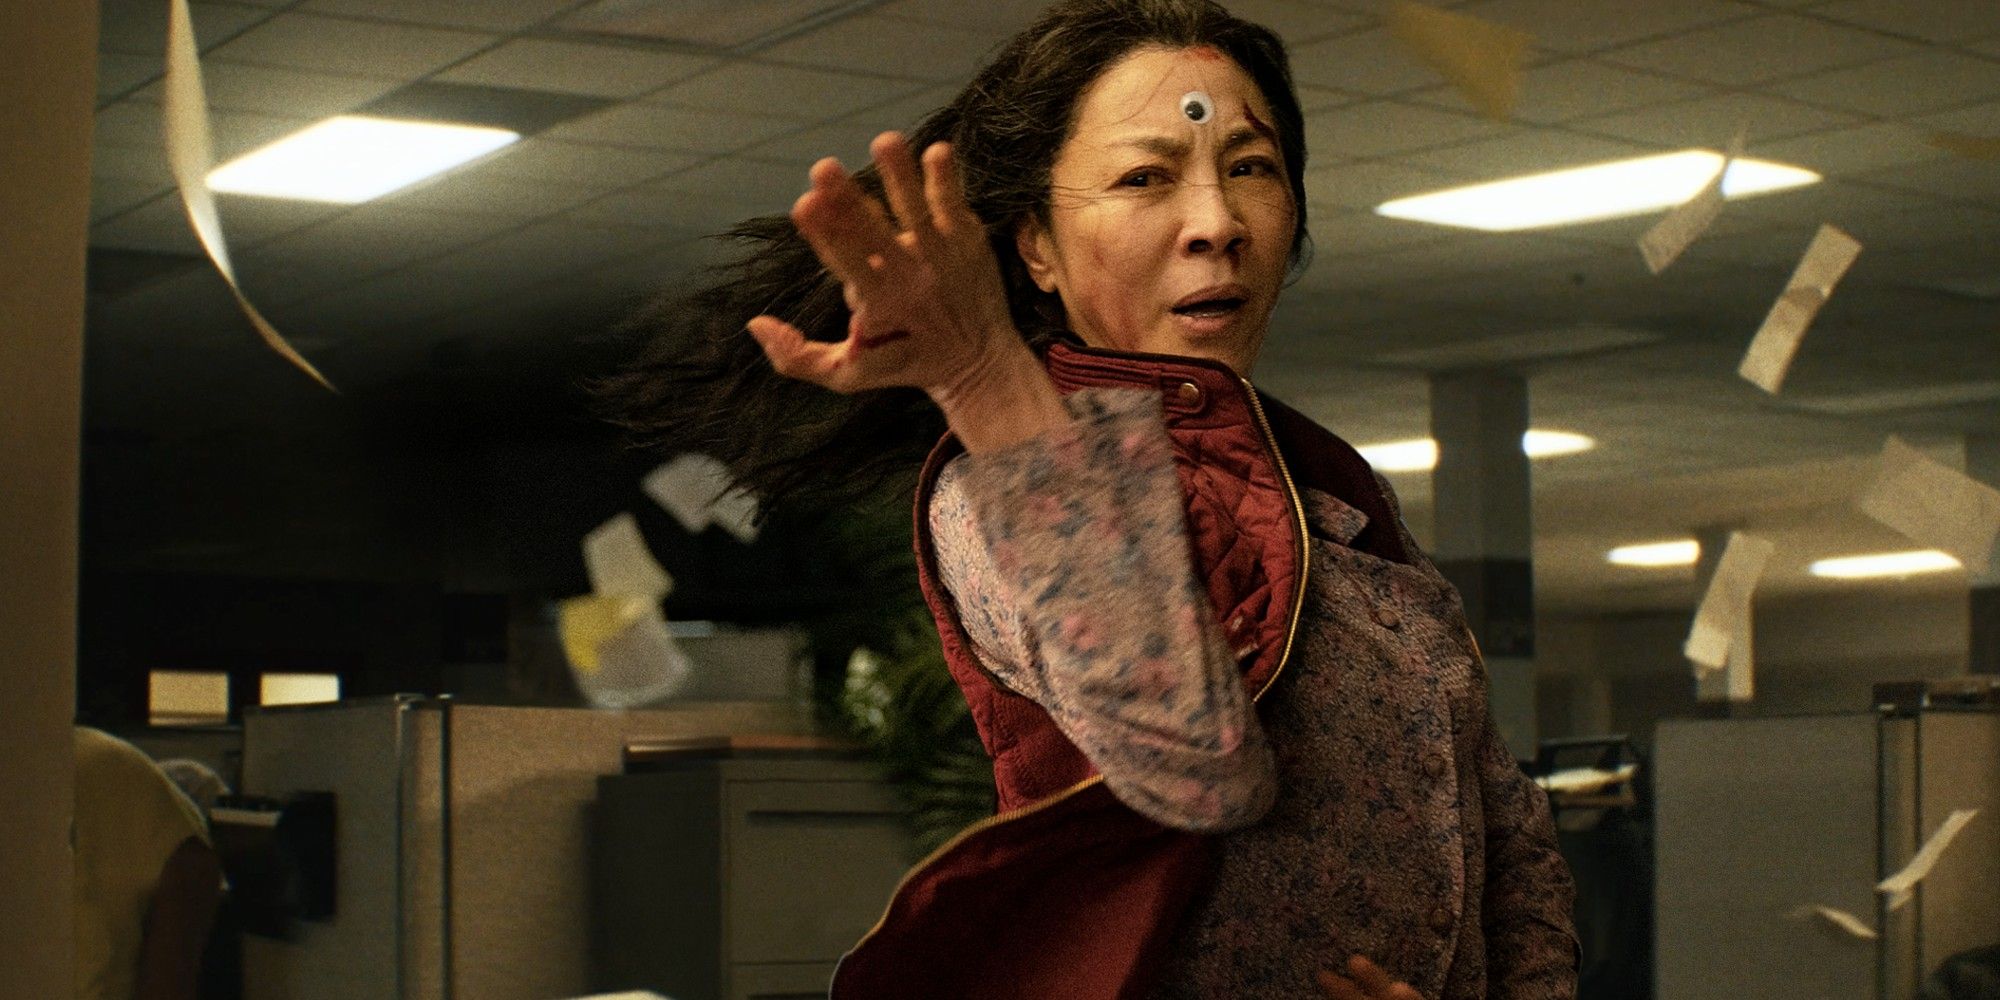 Michelle Yeoh dans 'Everything Everywhere All At Once' (Tout partout, tout de suite)